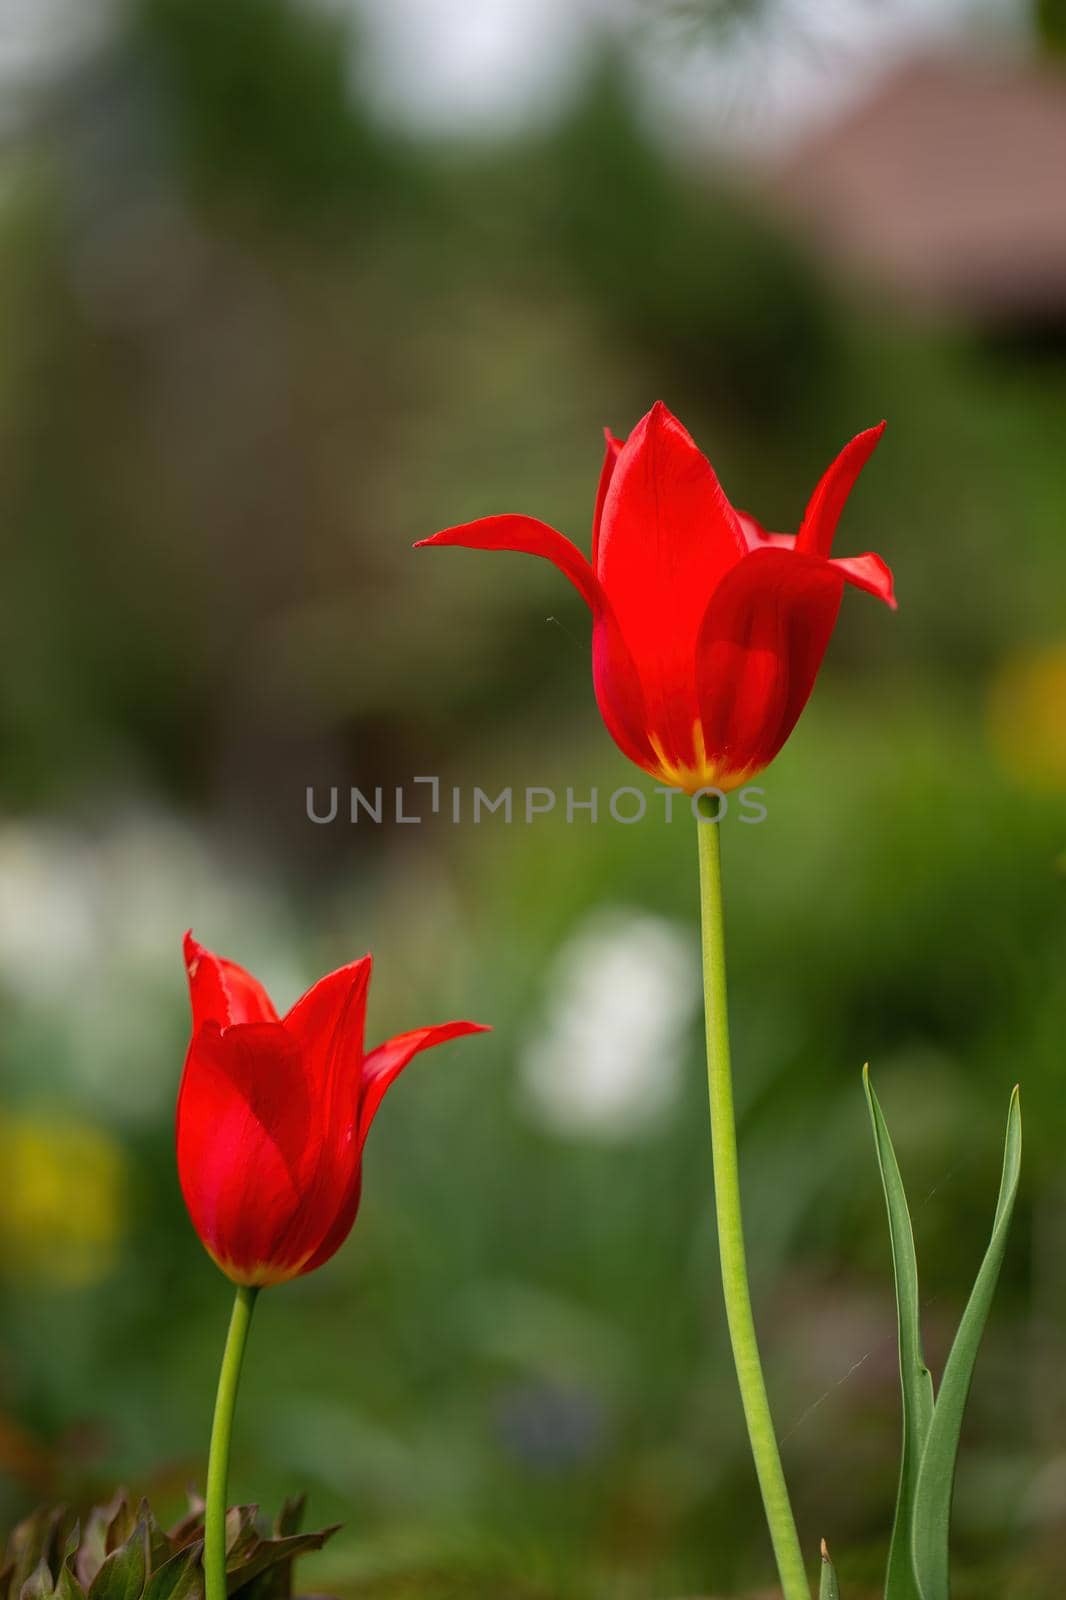 Red tulips in the garden over blurred green background at spring